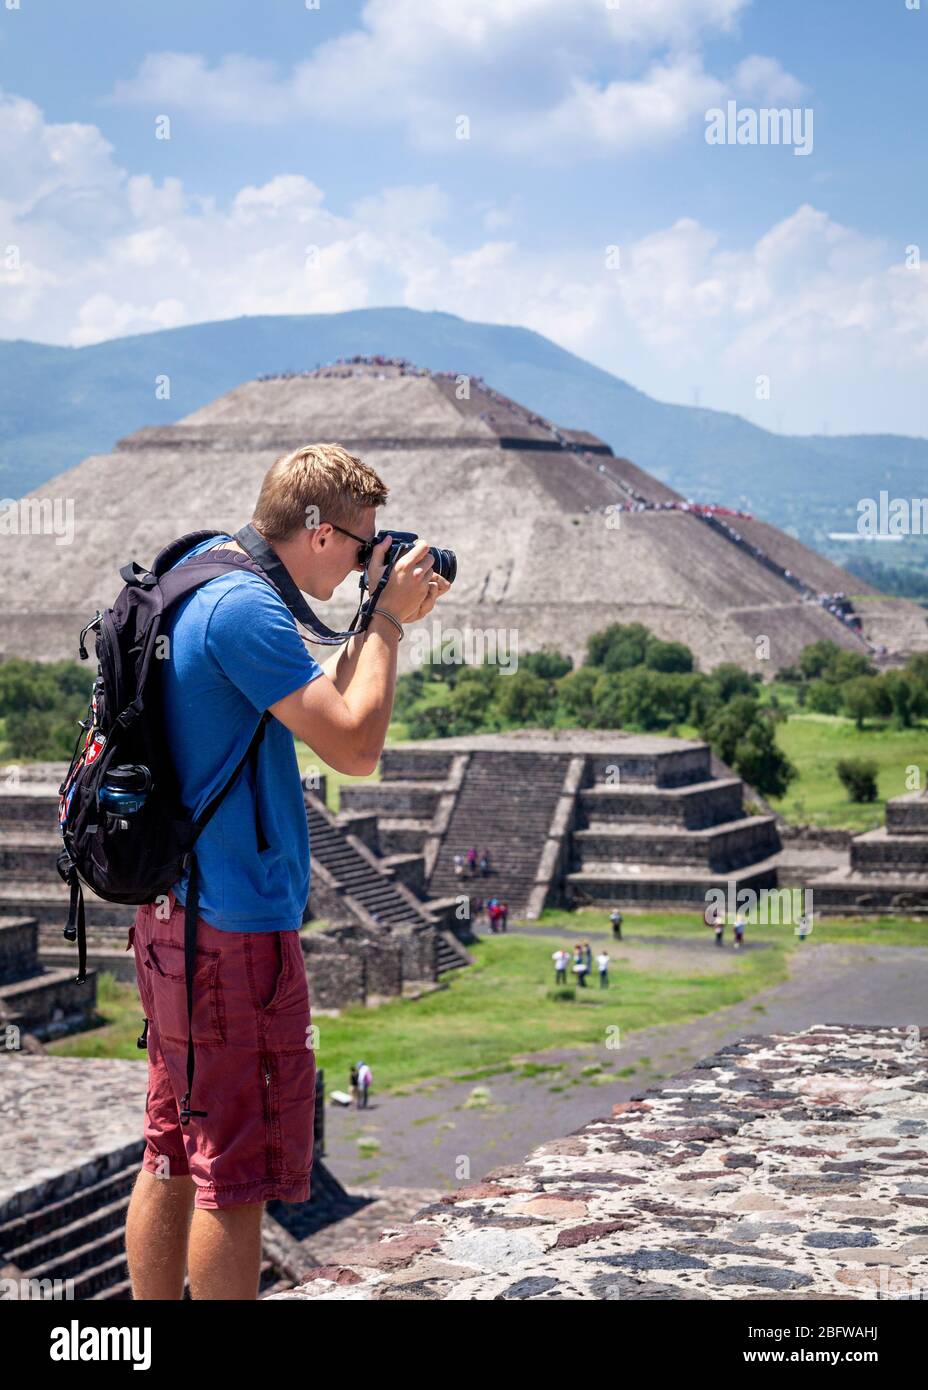 Young man photographs from atop the Pyramid of the Moon in Teotihuacan, Mexico. Stock Photo